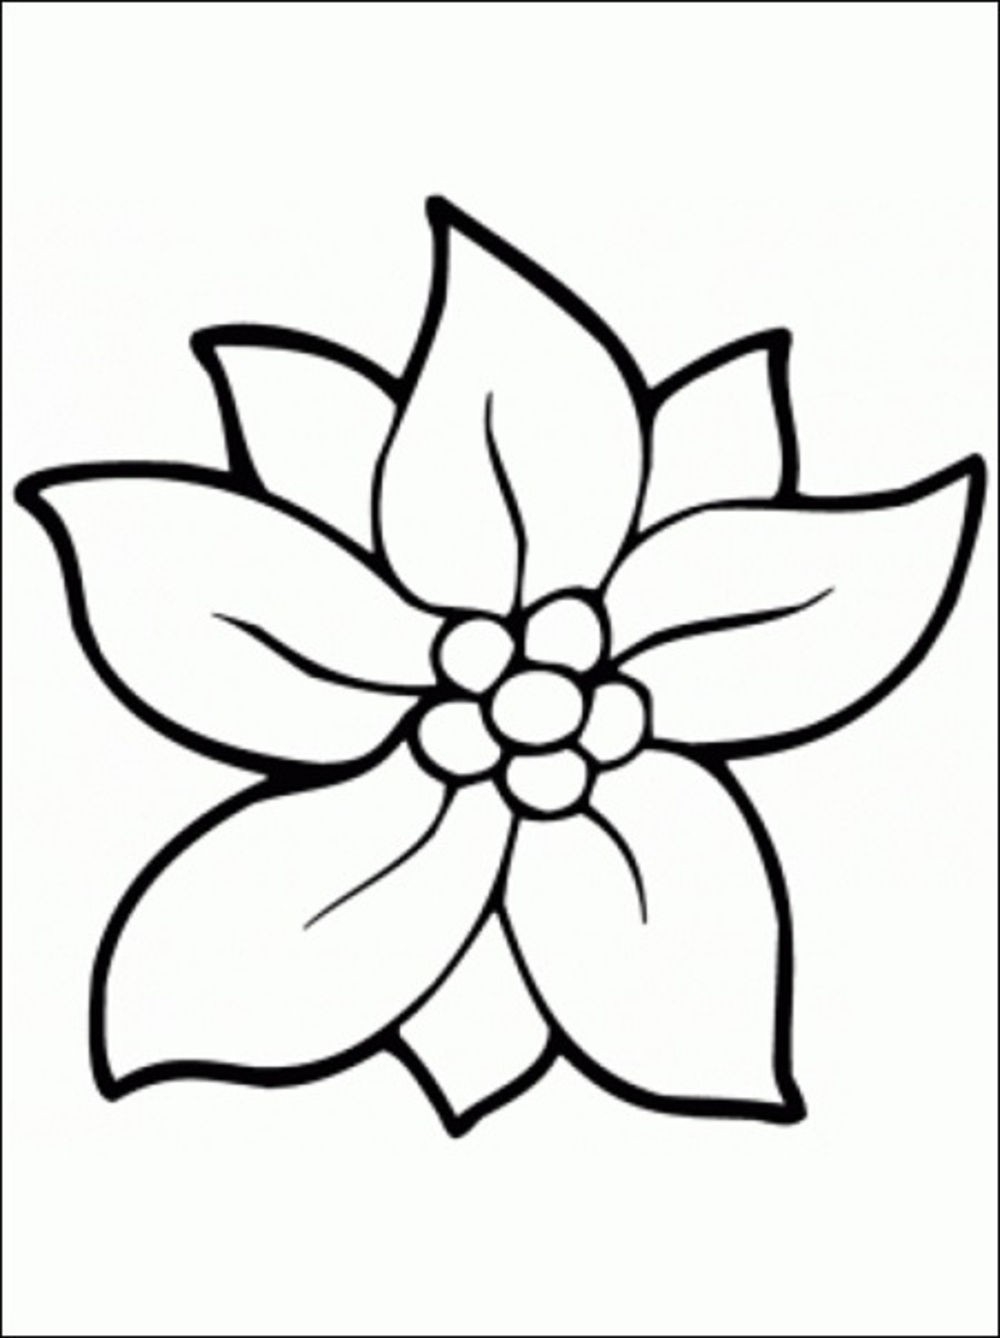 Jasmine Flower Coloring Pages at GetColorings.com | Free printable